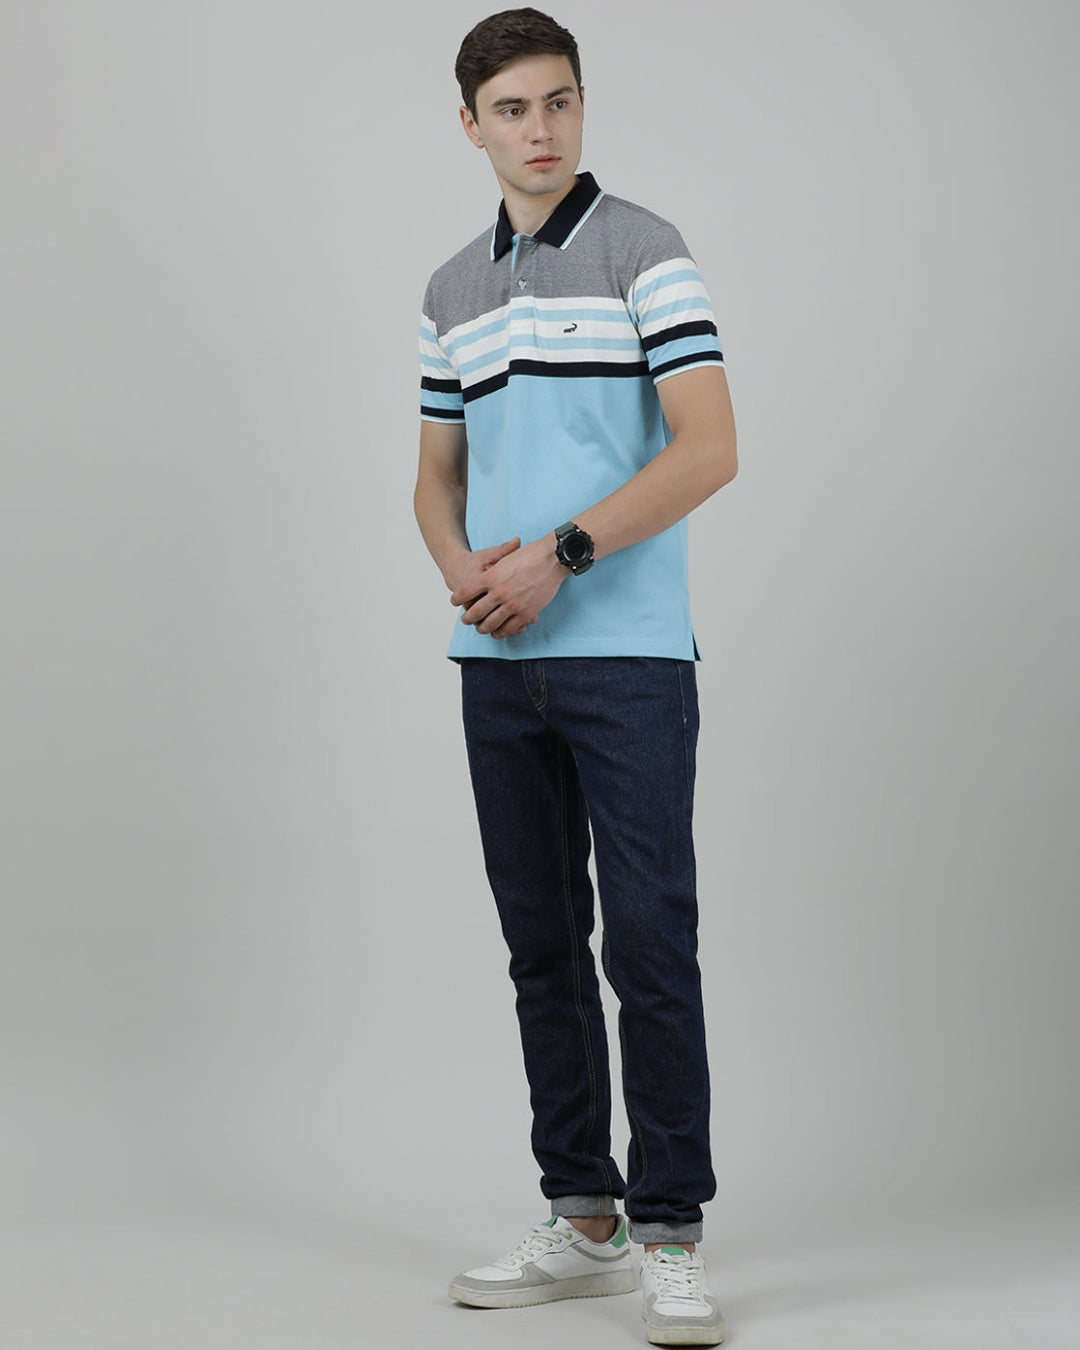 Crocodile Casual Light Blue T-Shirt Engineering Stripes Half Sleeve Slim Fit with Collar for Men